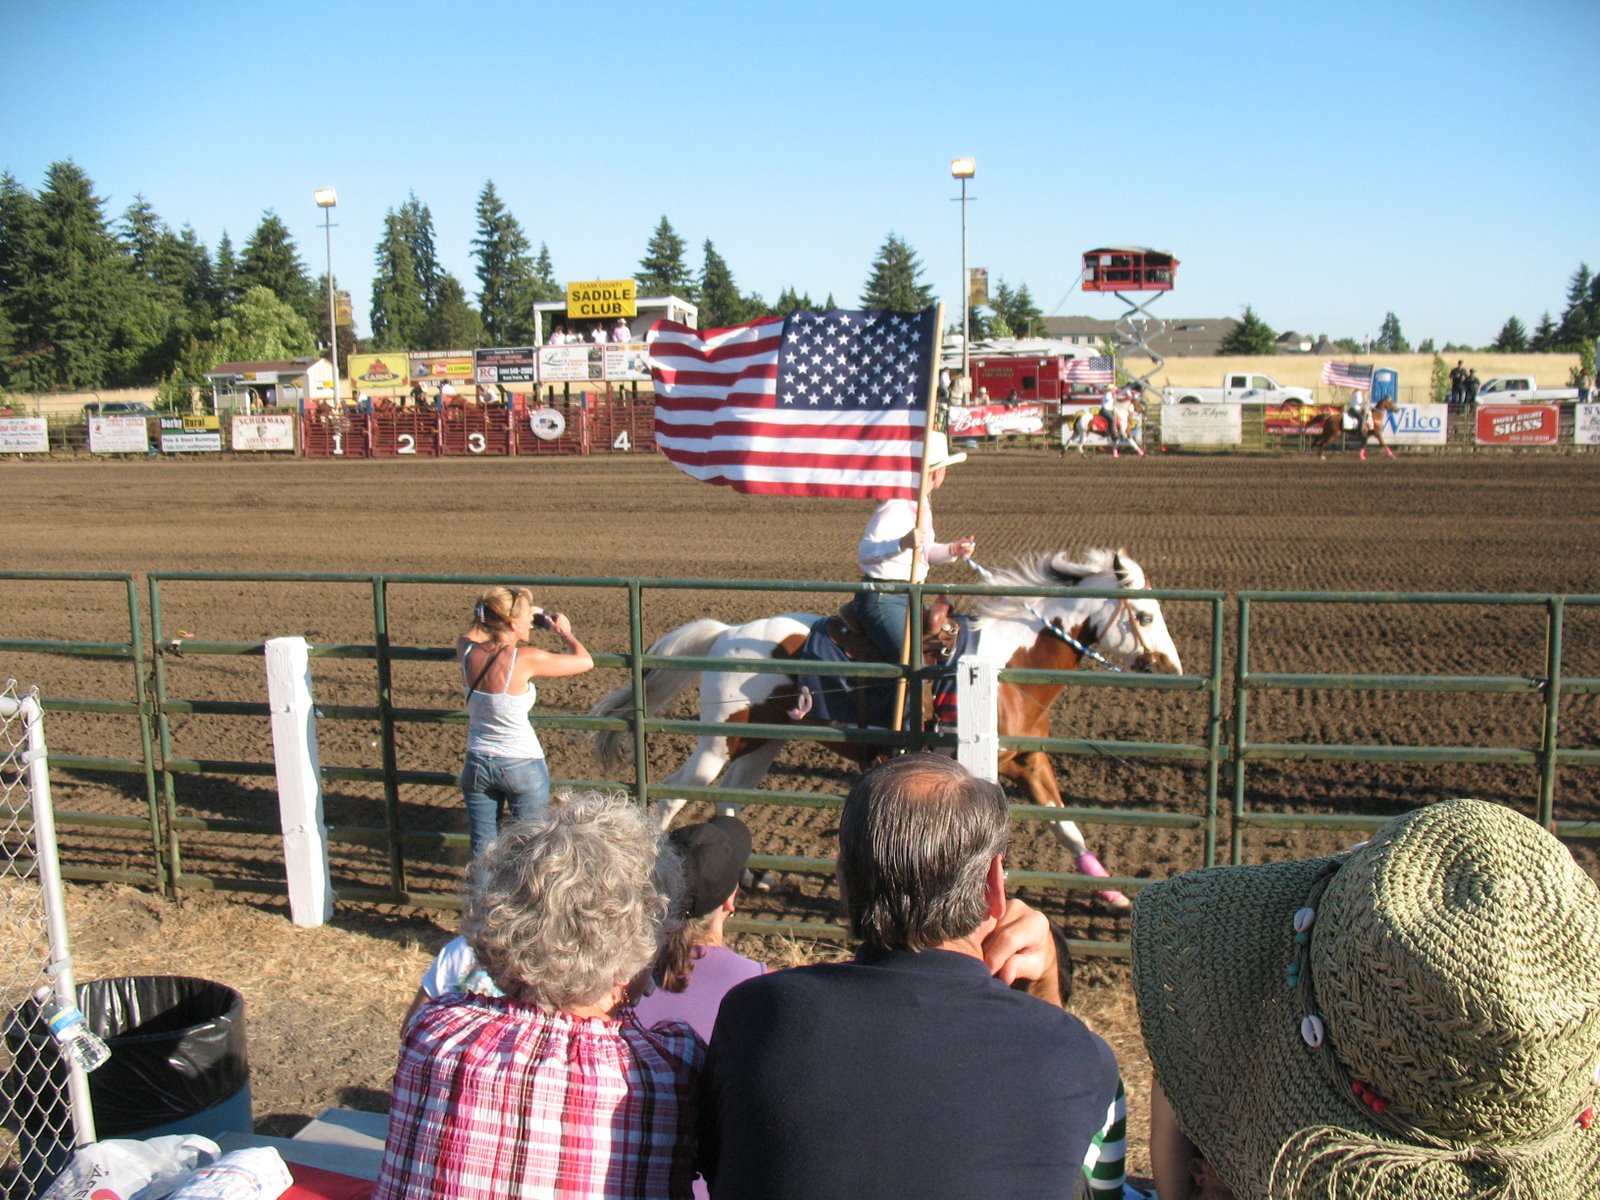 [Clark+County+4th+of+July+Rodeo+013.jpg]